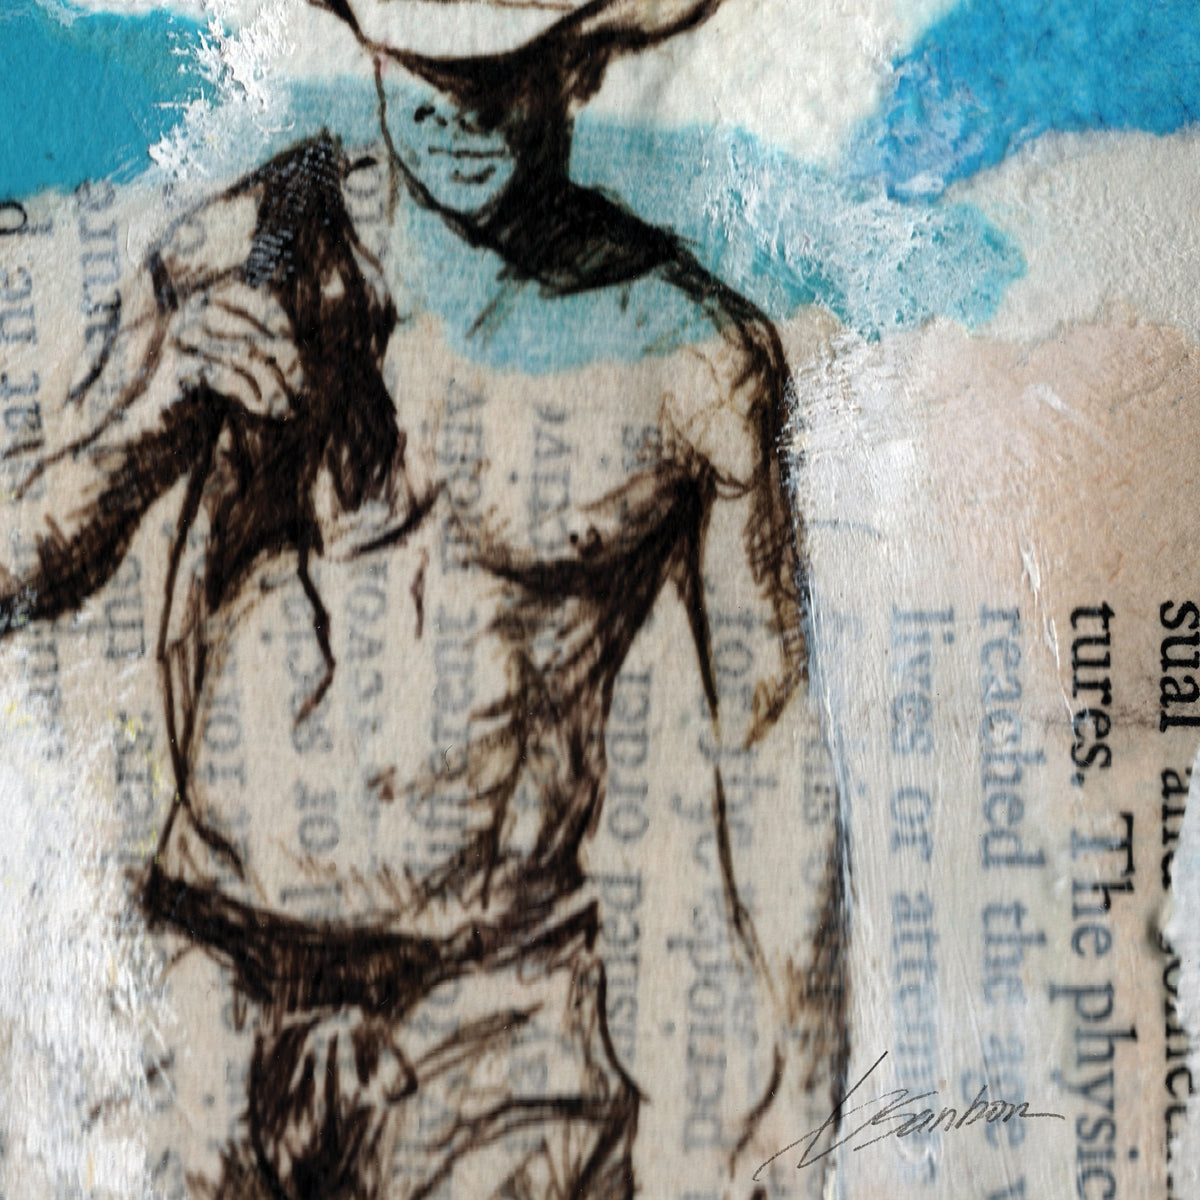 Shirtless Cowboy with Killer Abs - Giclee Art Print